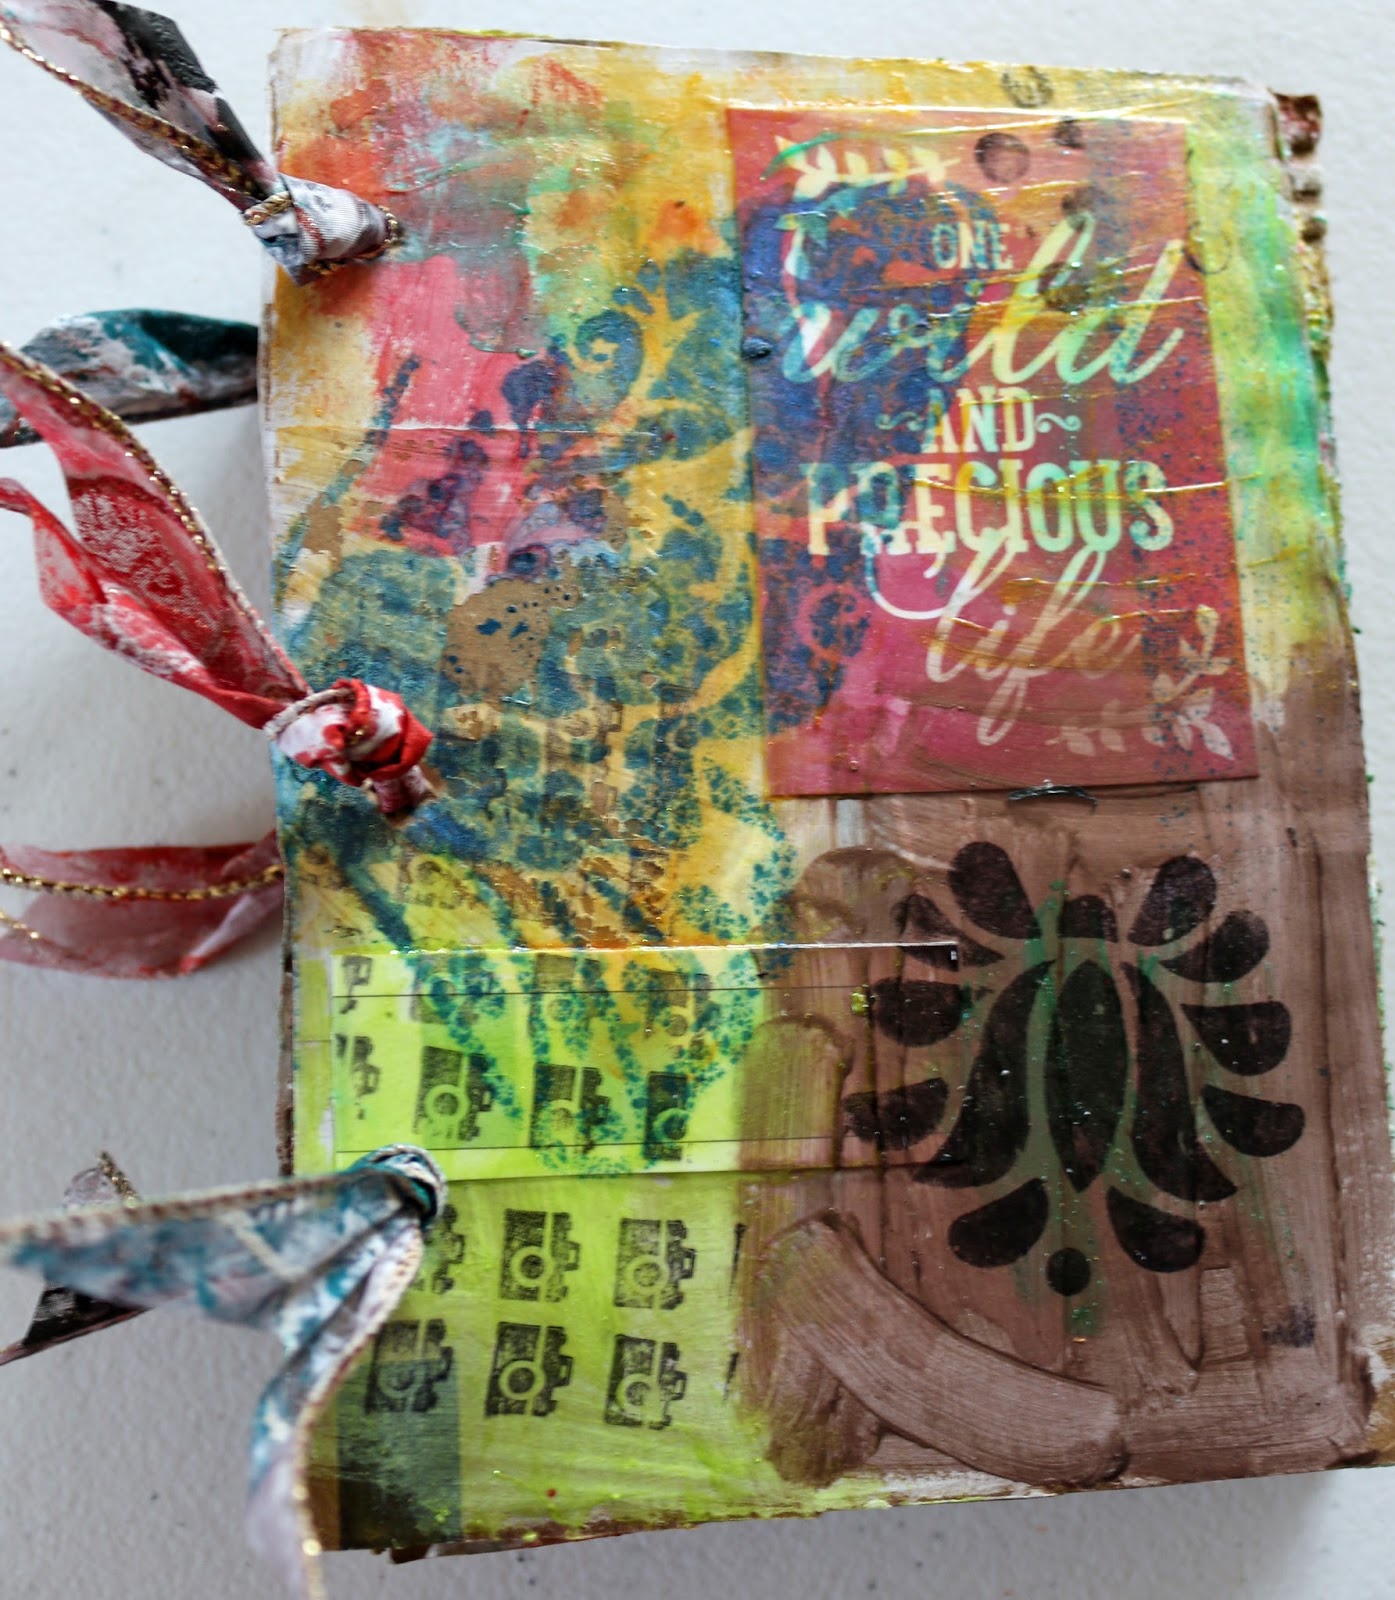 How To Turn a Book into a Journal - Carolyn Dube